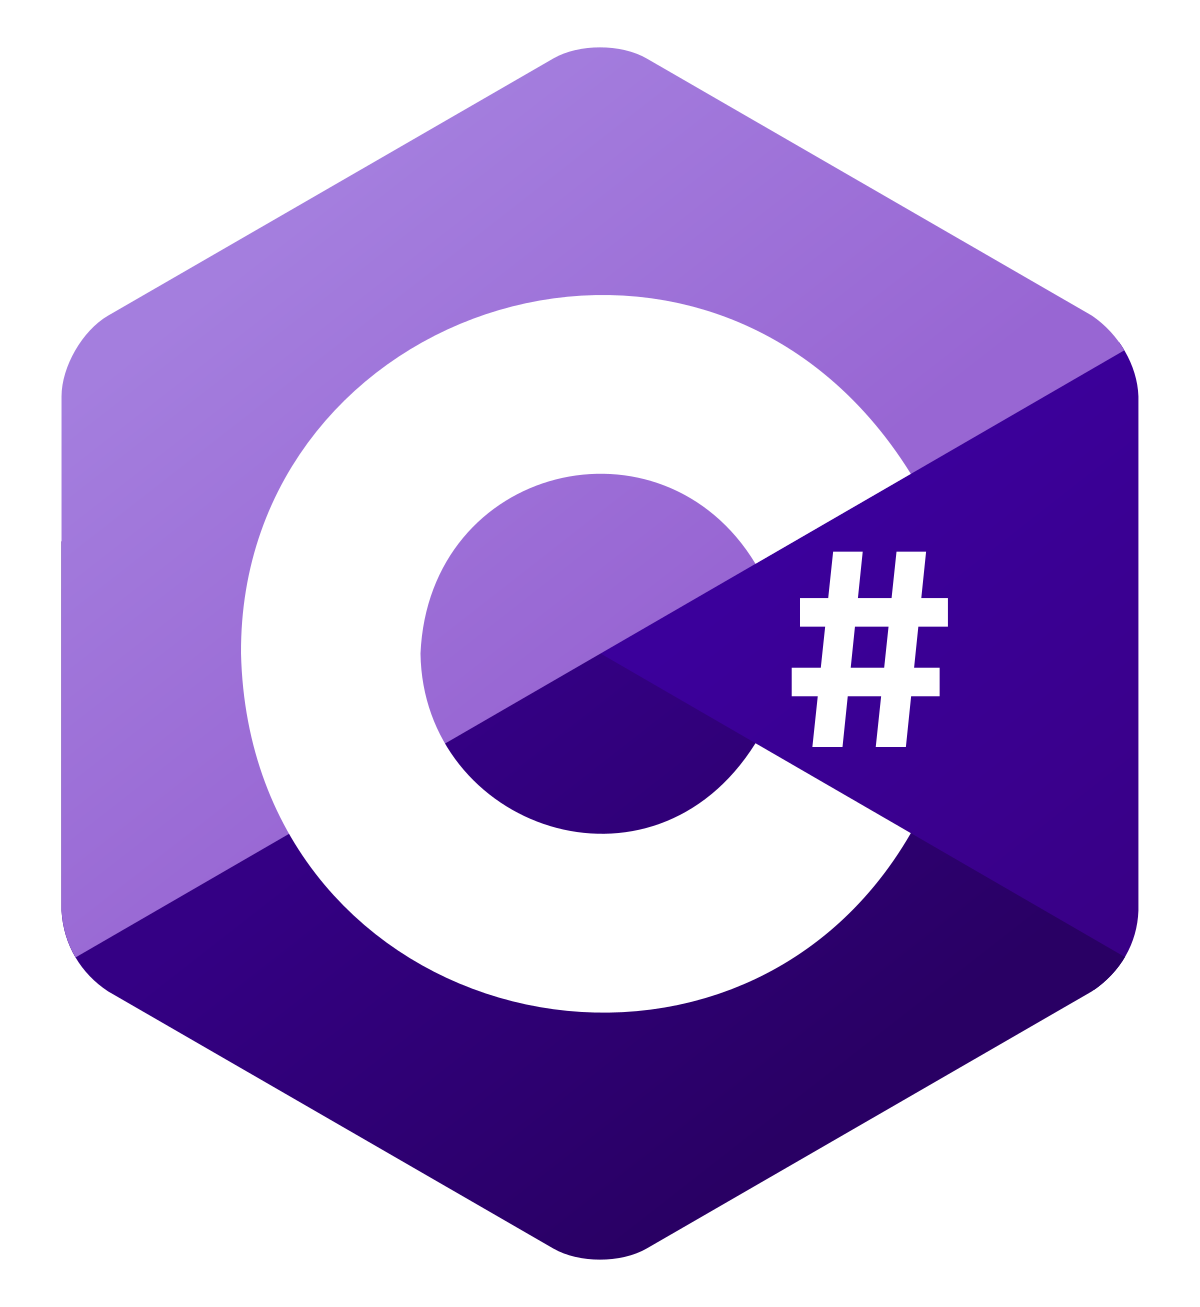 code examples and answer to questions in C# programming luaguage